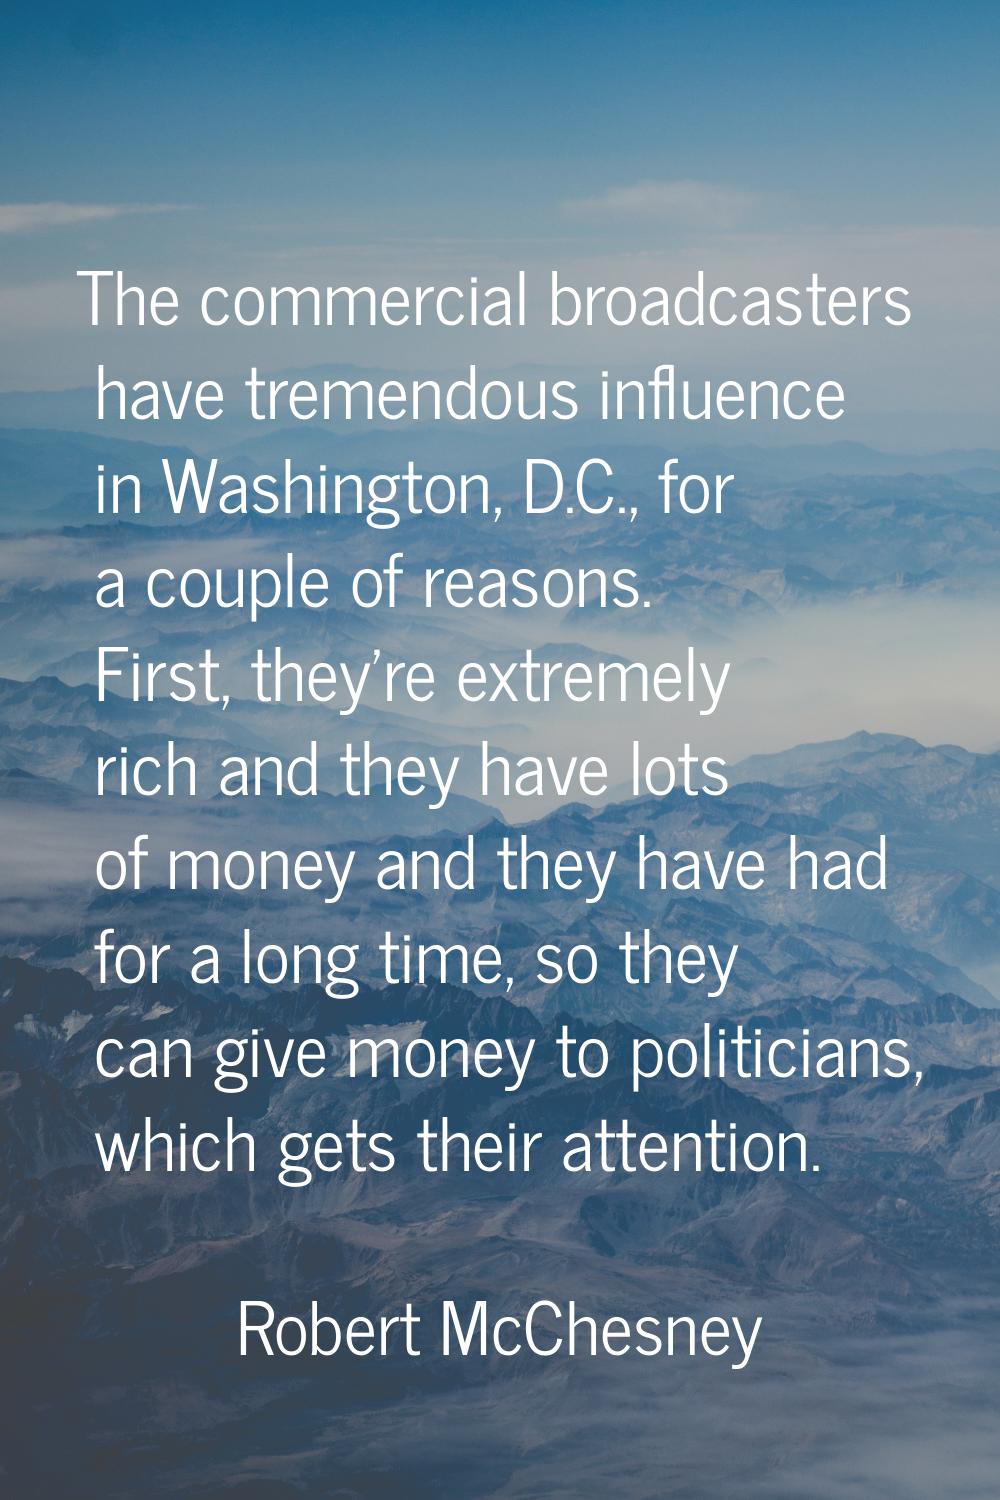 The commercial broadcasters have tremendous influence in Washington, D.C., for a couple of reasons.